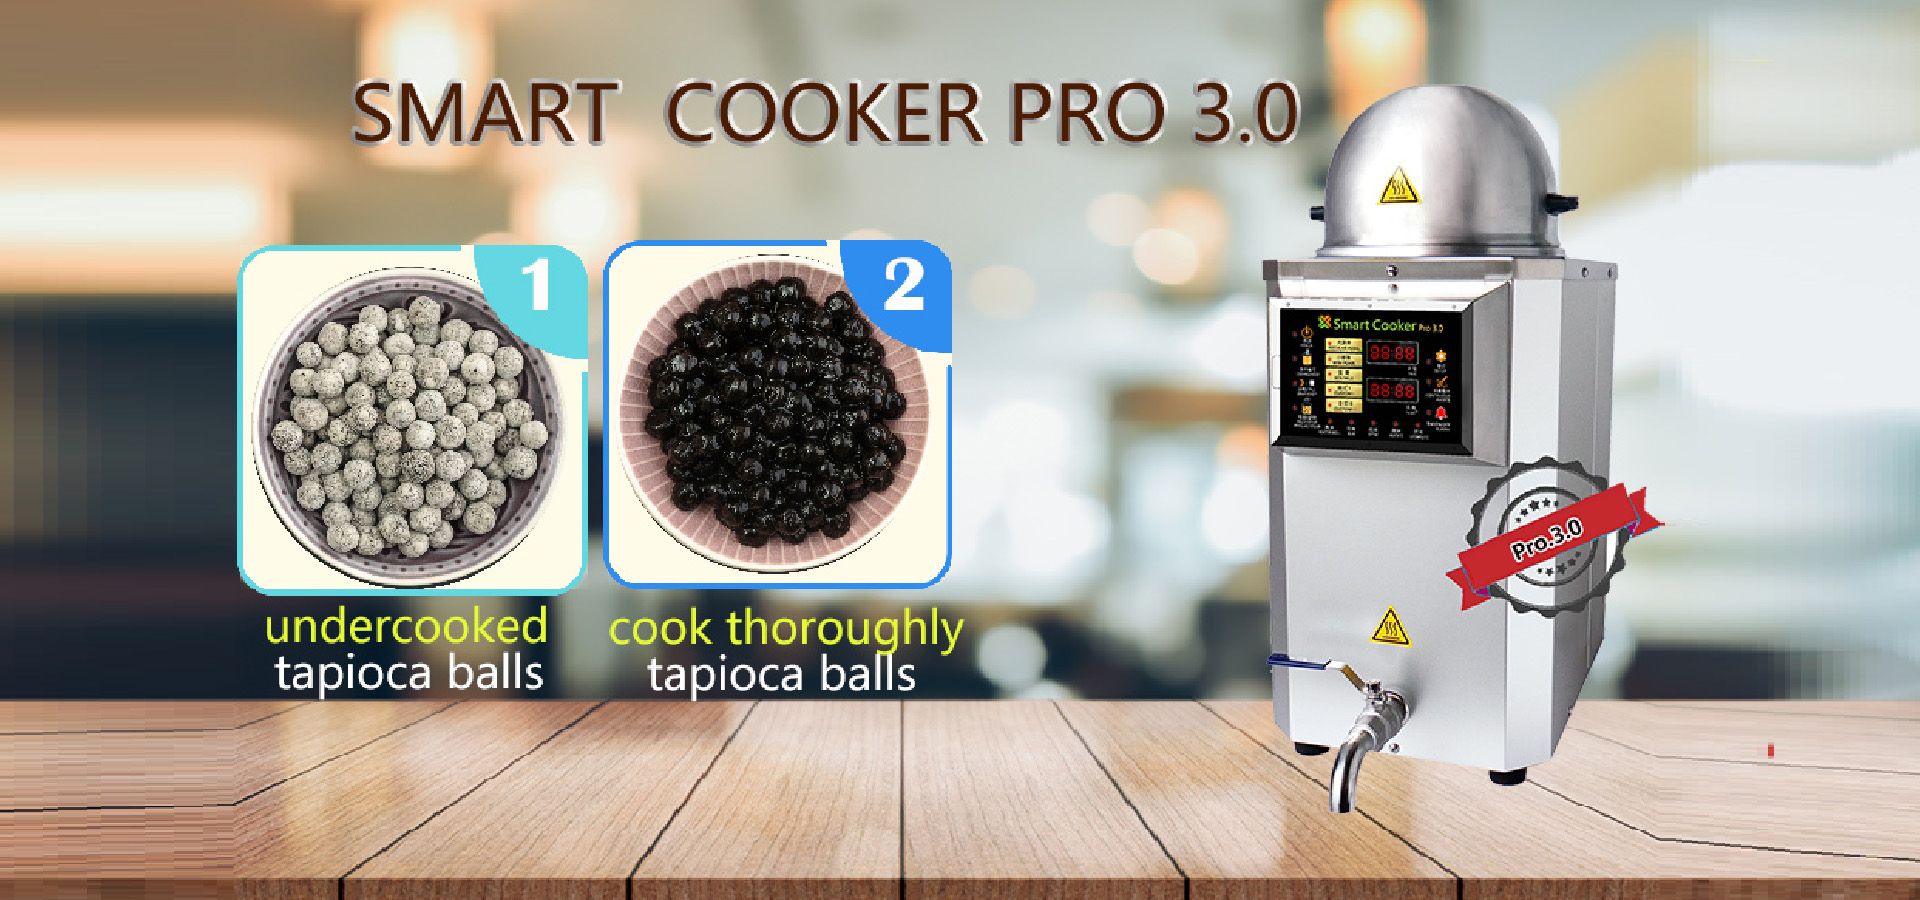 smart cooker 3.0 operate 